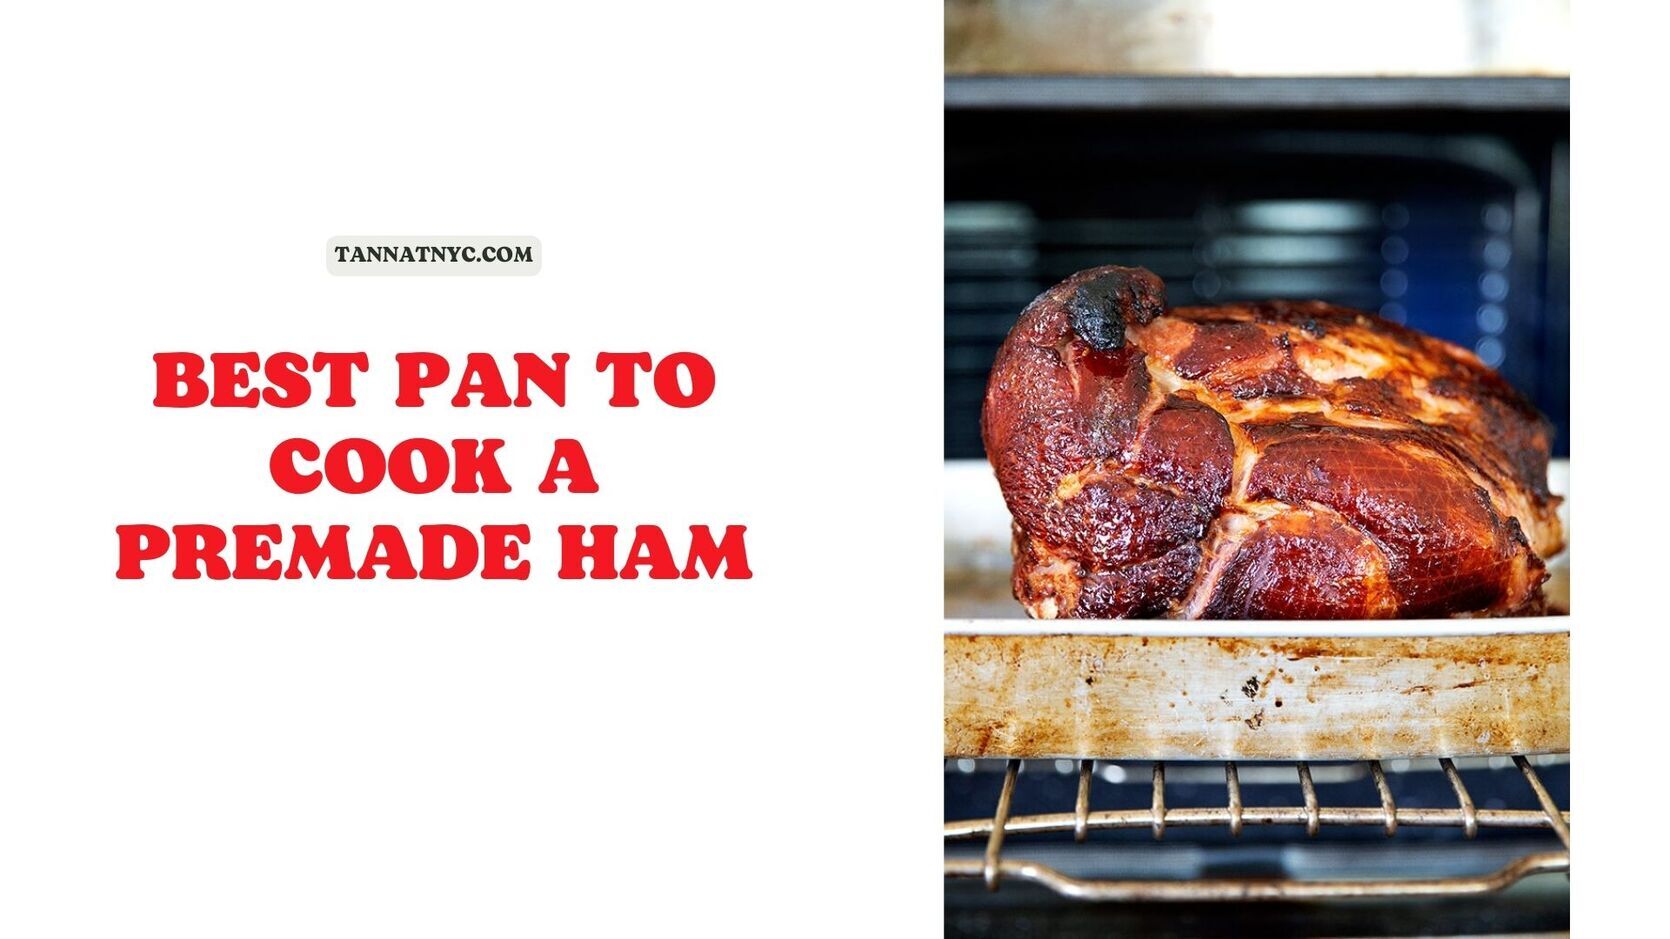 Best Pan to Cook a Premade Ham